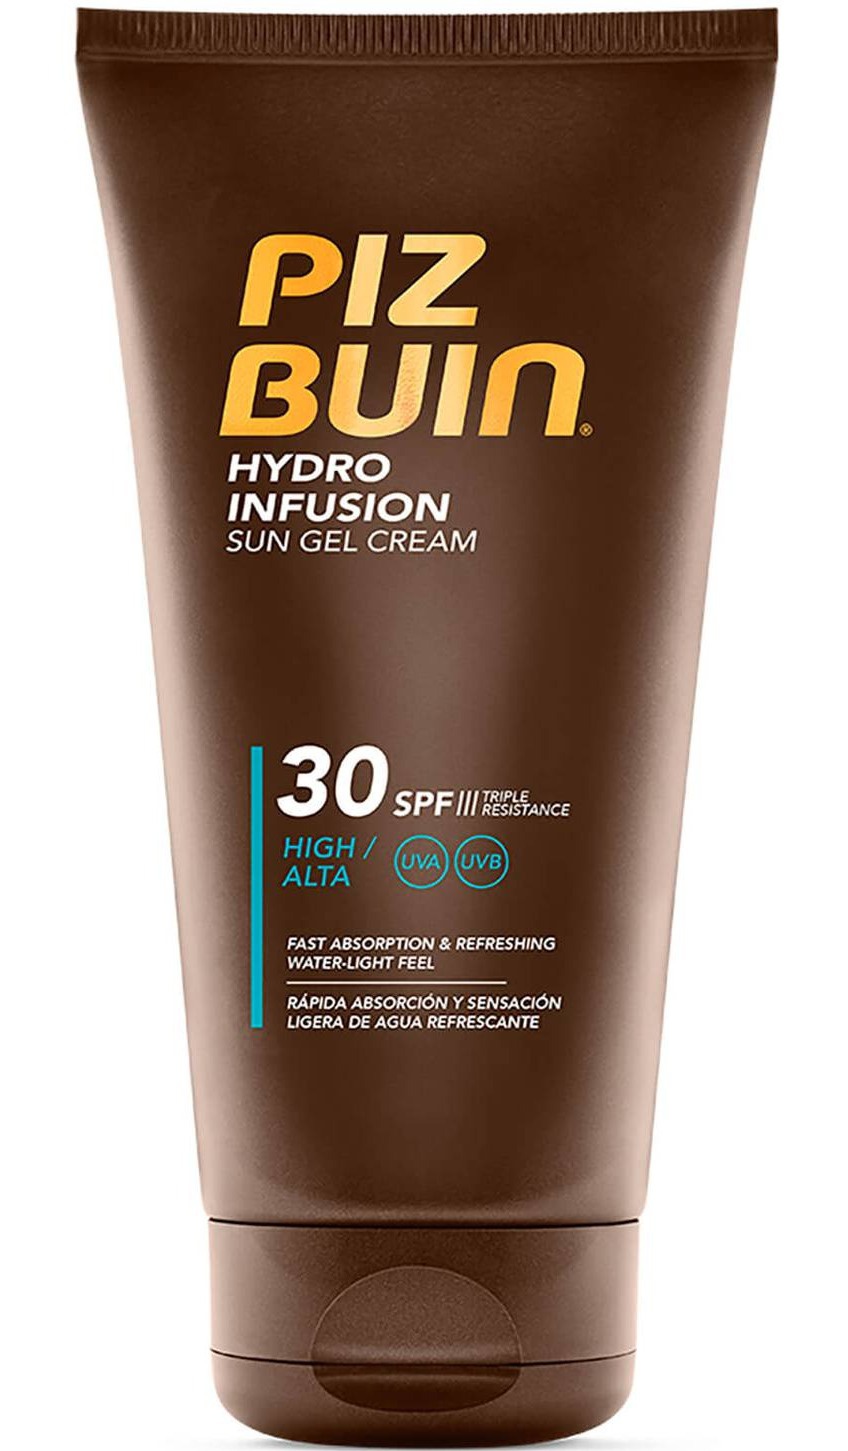 Piz Buin Hydro Infusion Sun Gel Cream 30 SPF ingredients (Explained)